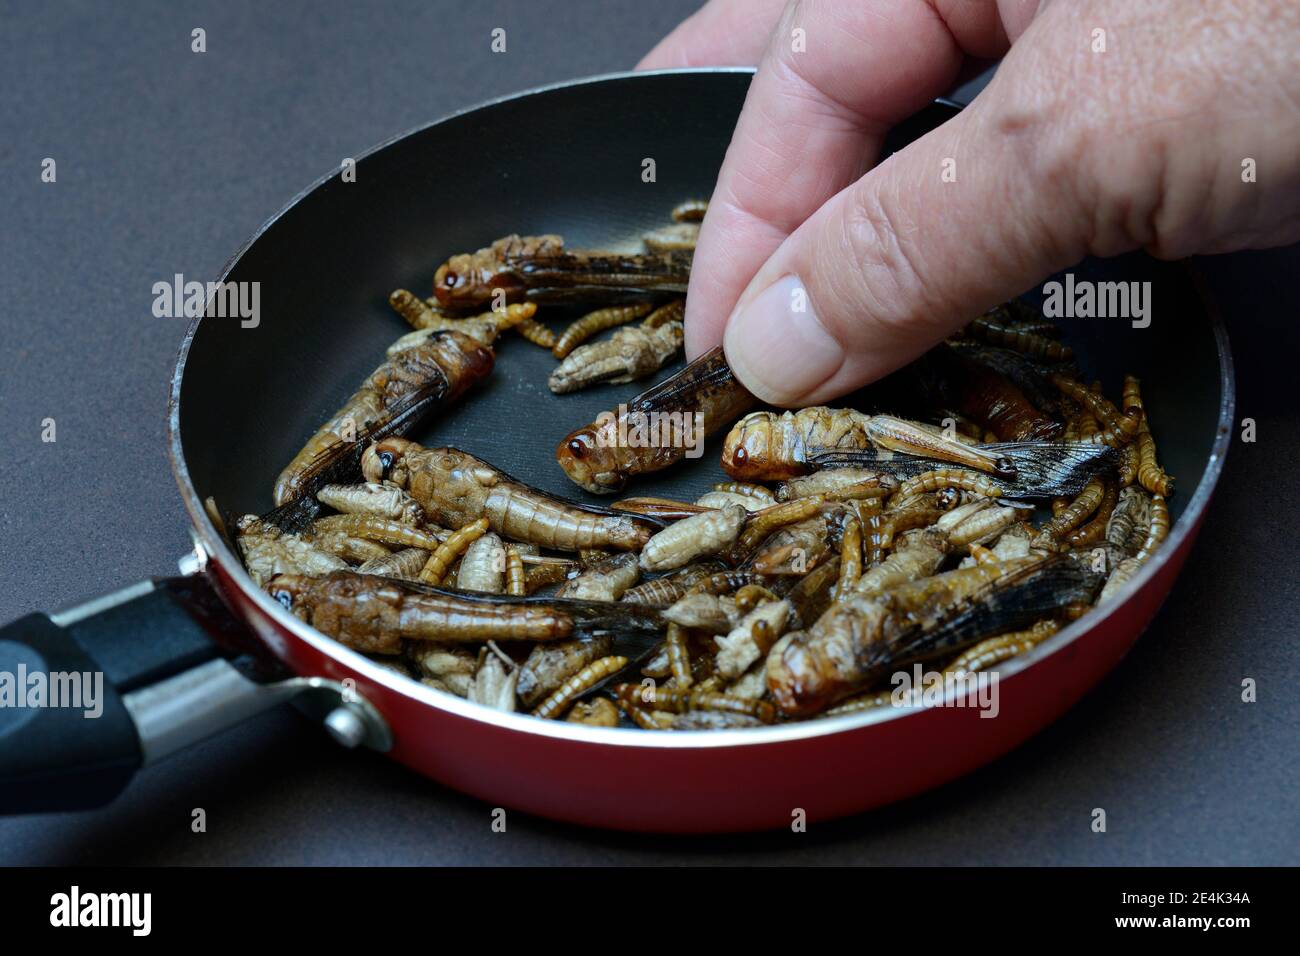 Insect food, various fried insects in a pan, locusts, crickets, mealworms(Locusta migratoria), Acheta domesticus, Tenebrio molitor Stock Photo